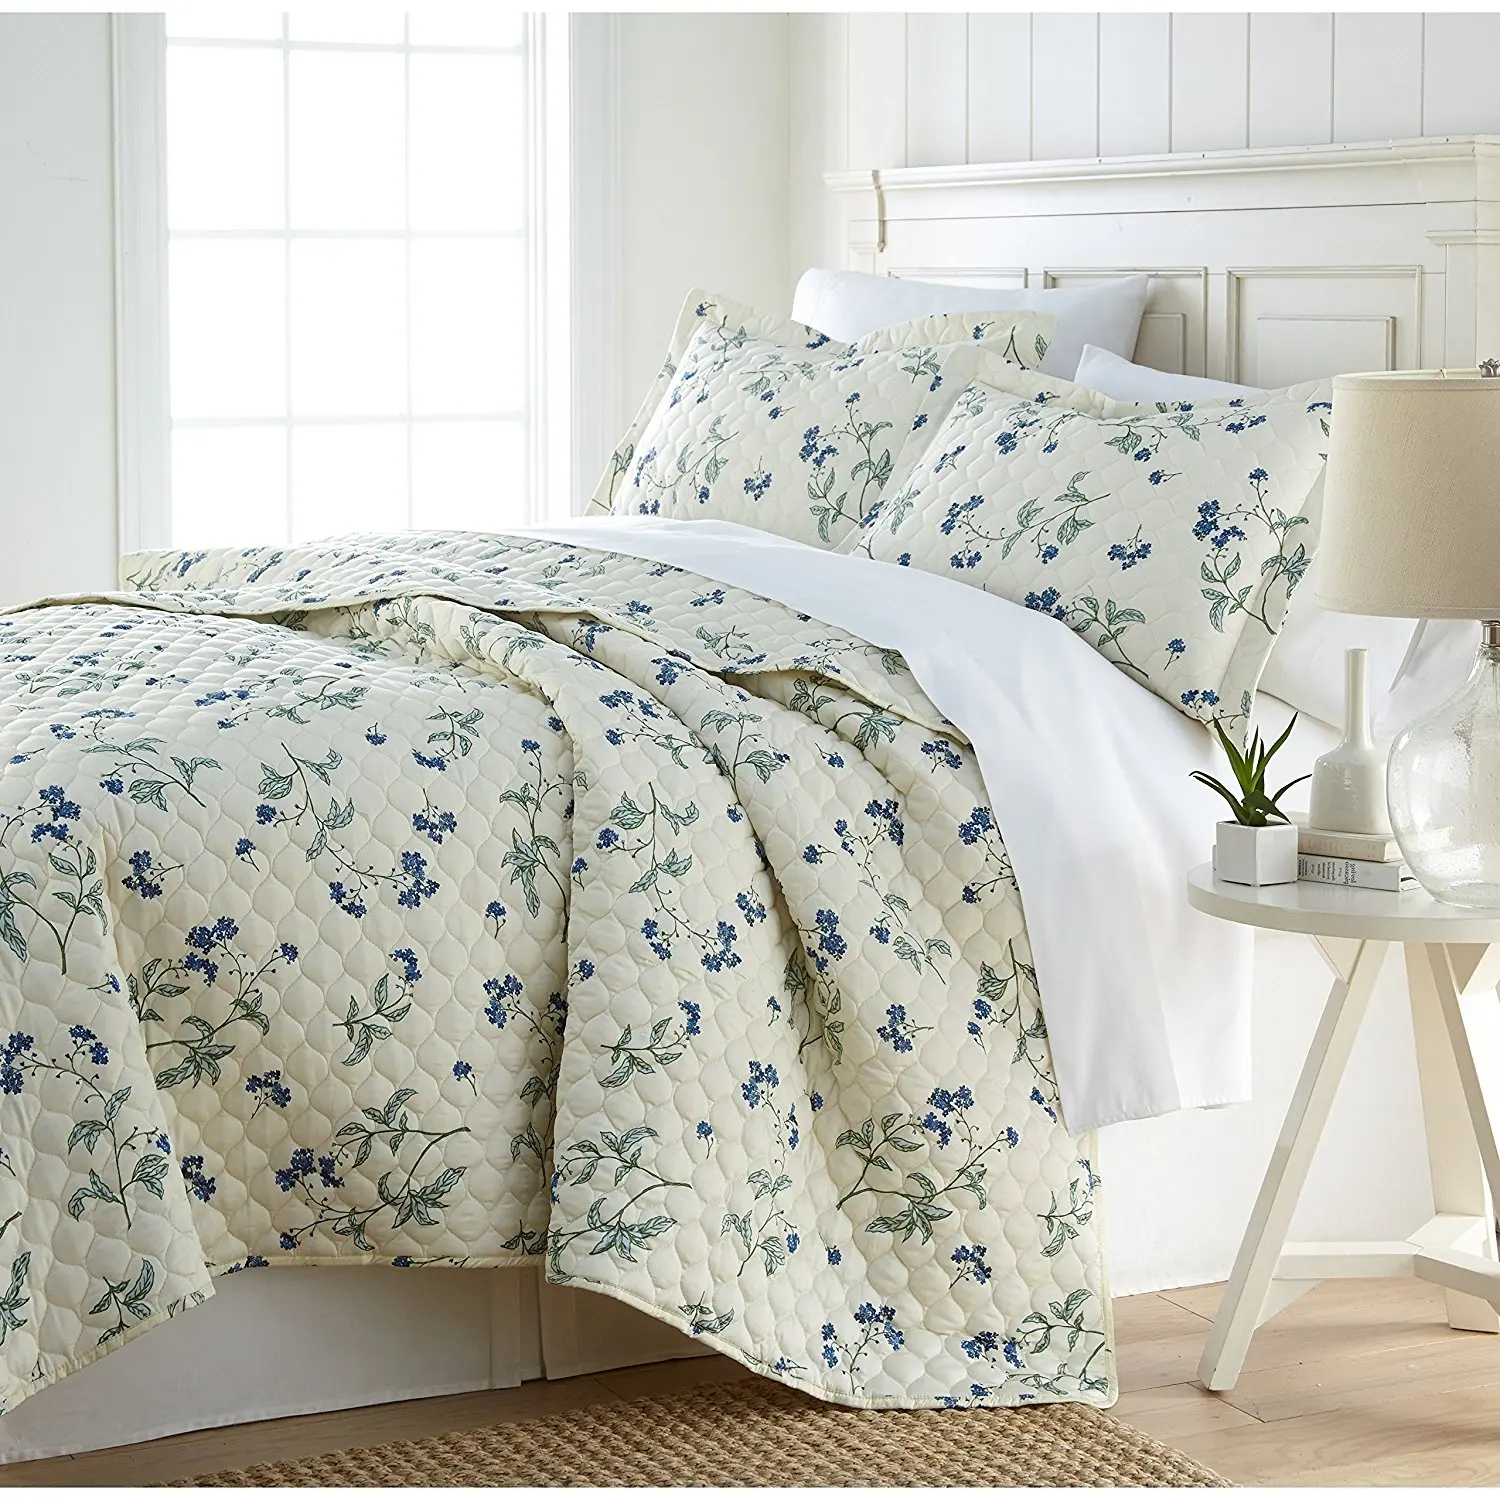 Cheap Cottage Style Bedding Find Cottage Style Bedding Deals On